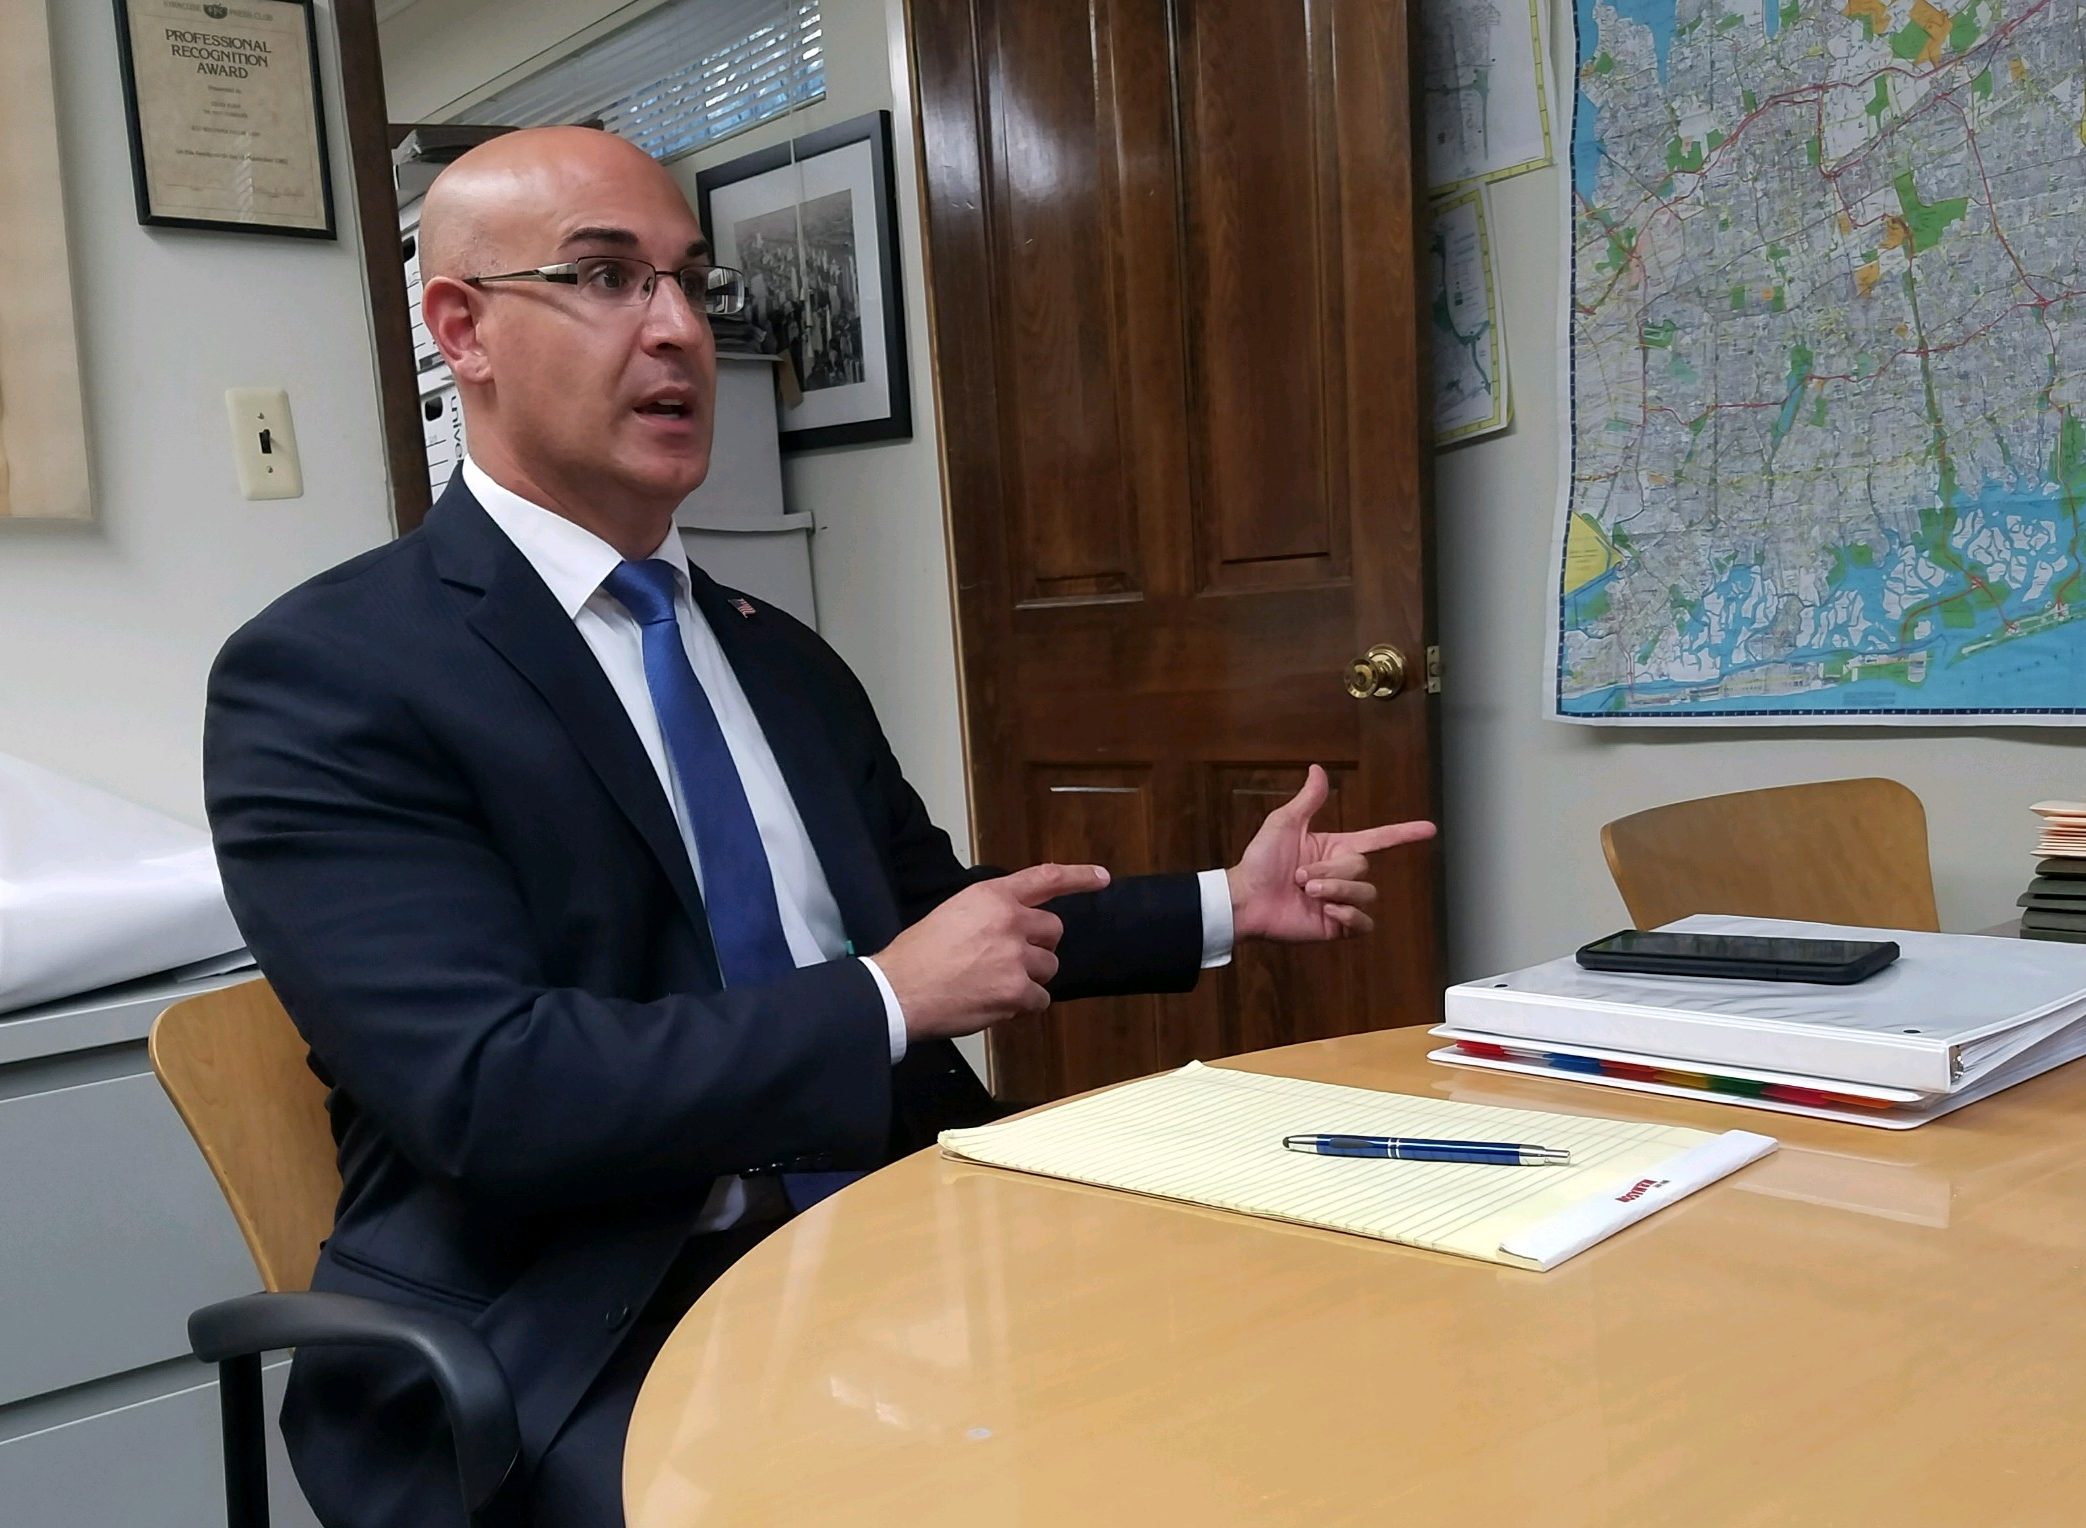 Ameer Benno, a civil rights attorney from Bellmore, speaks to Blank Slate Media about his congressional bit to unseat Rep. Kathleen Rice. (Photo by Janelle Clausen)